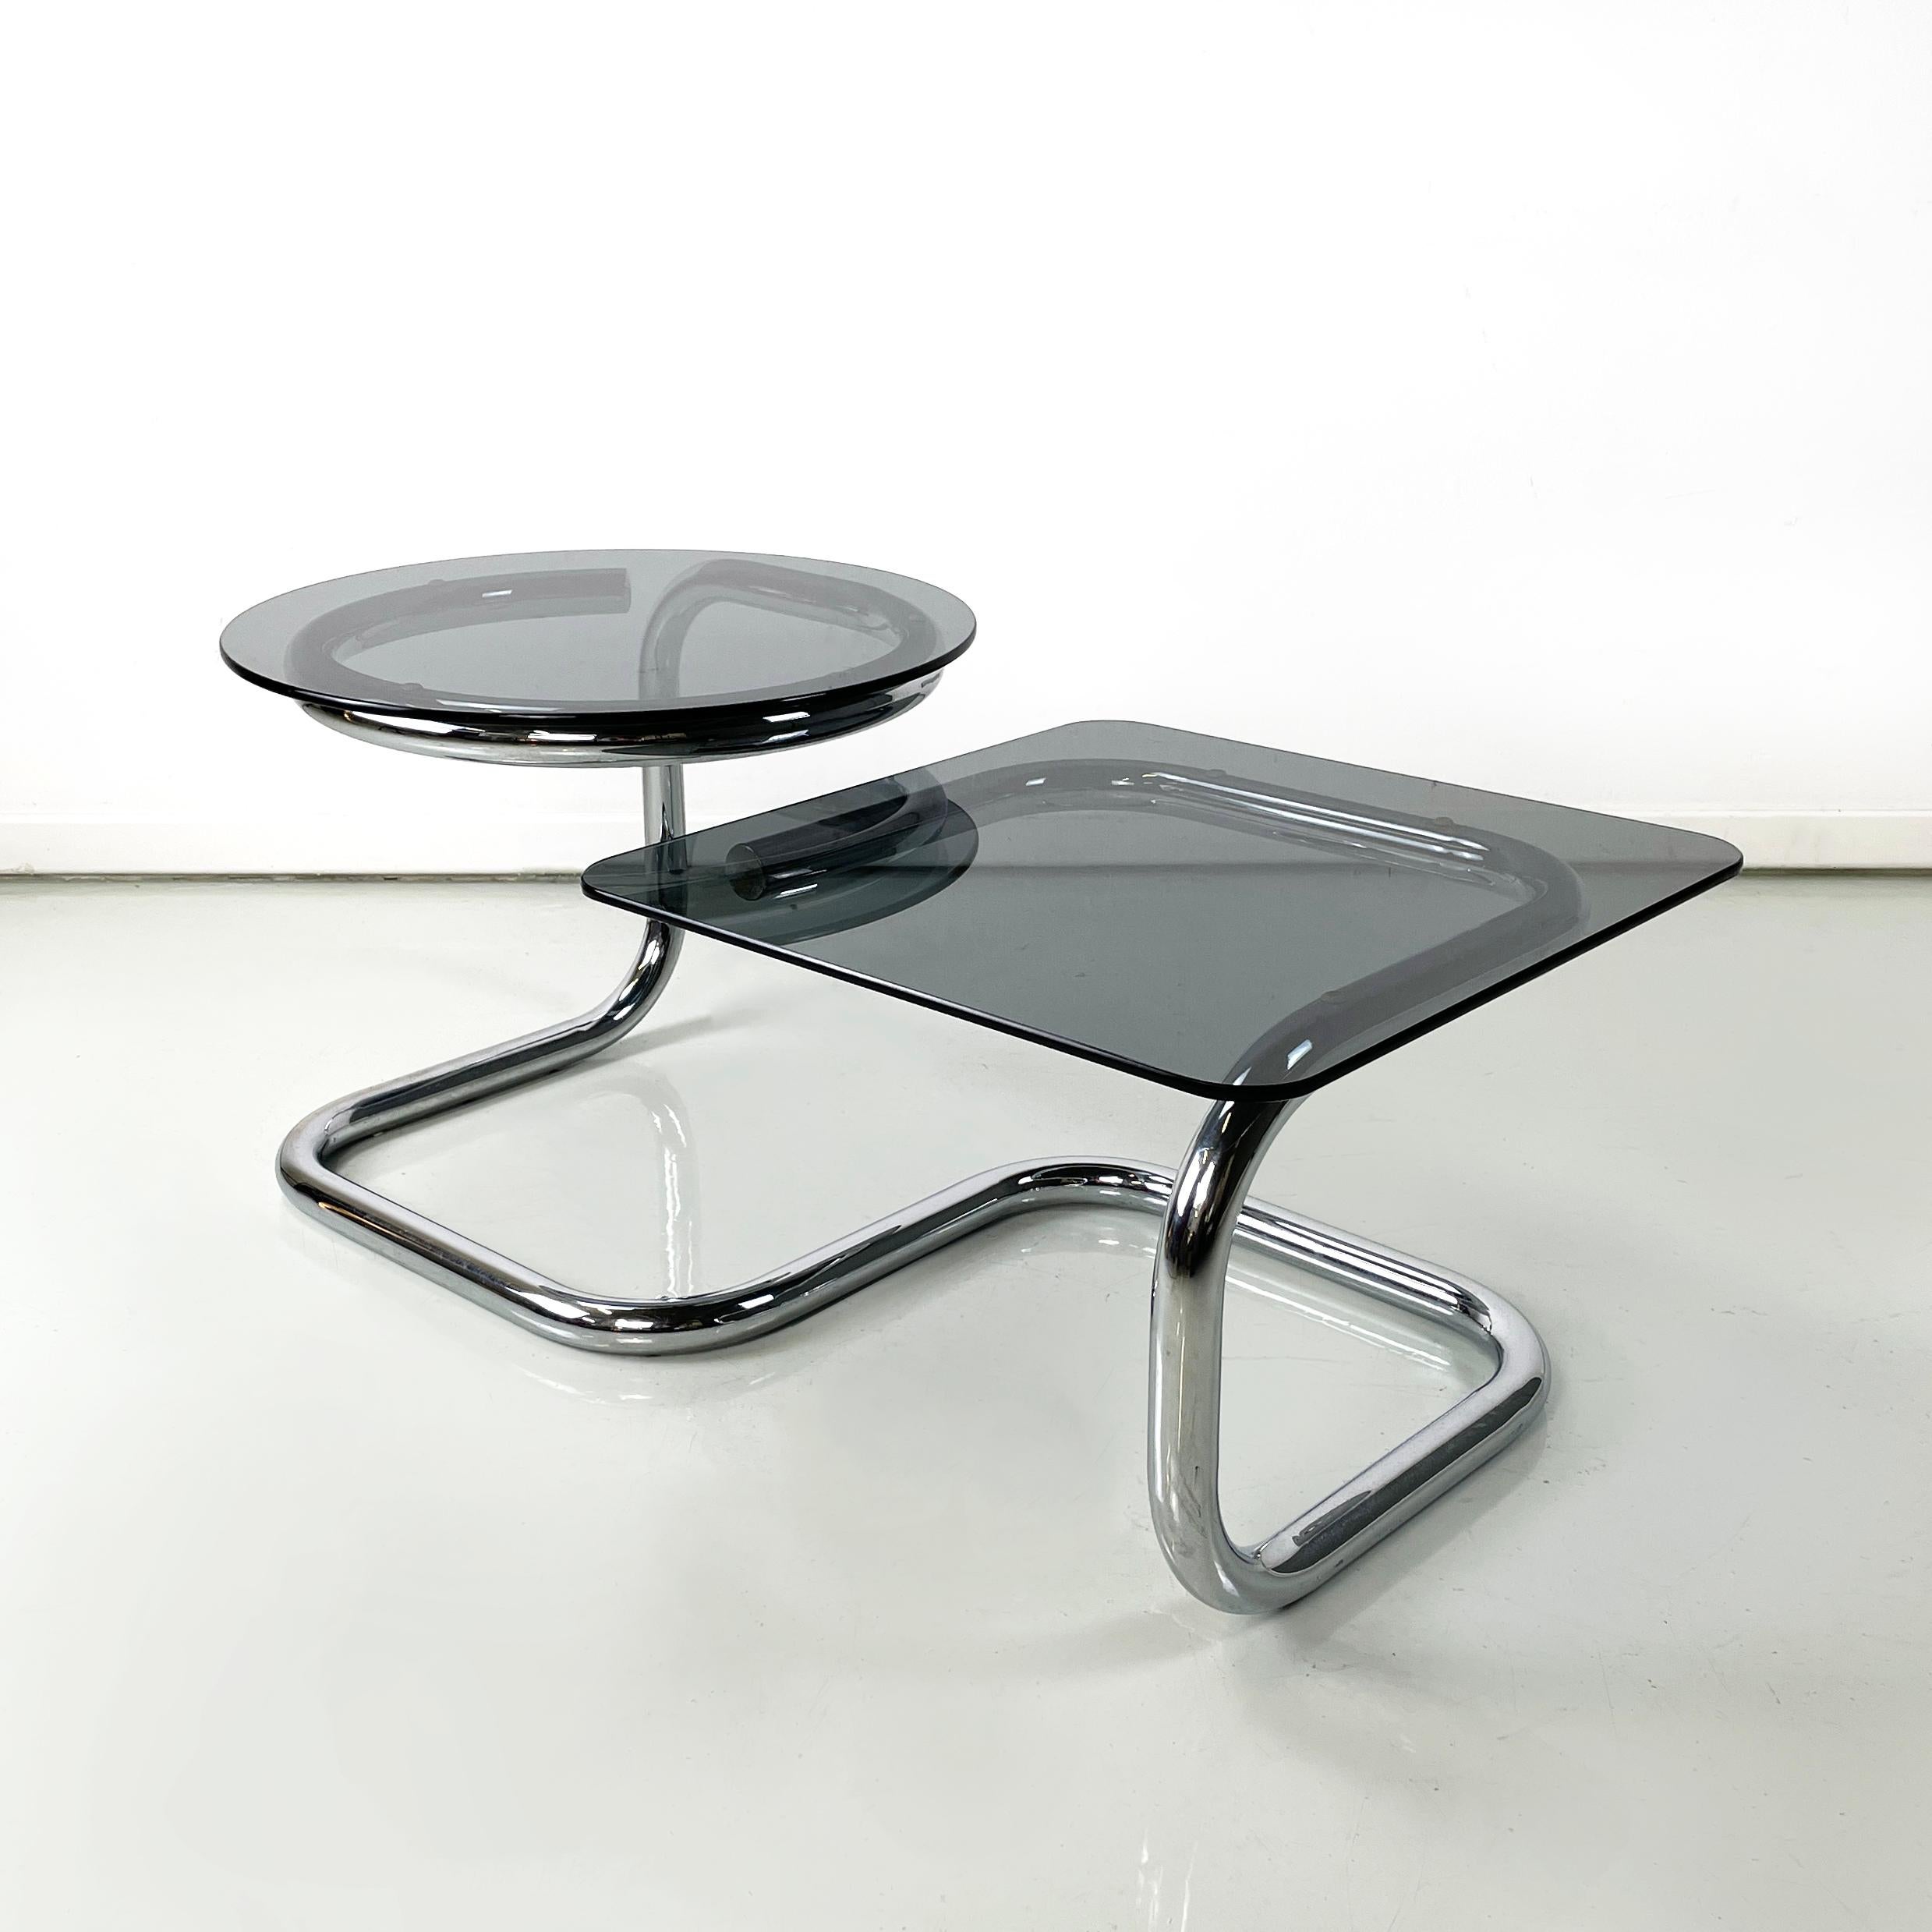 Italian modern Square and round coffee table in smoked glass and chromed steel, 1970s
Coffee table with double smoked glass shelves. The two tops have both different heights and shapes, indeed one is round and higher, the other is square and lower.